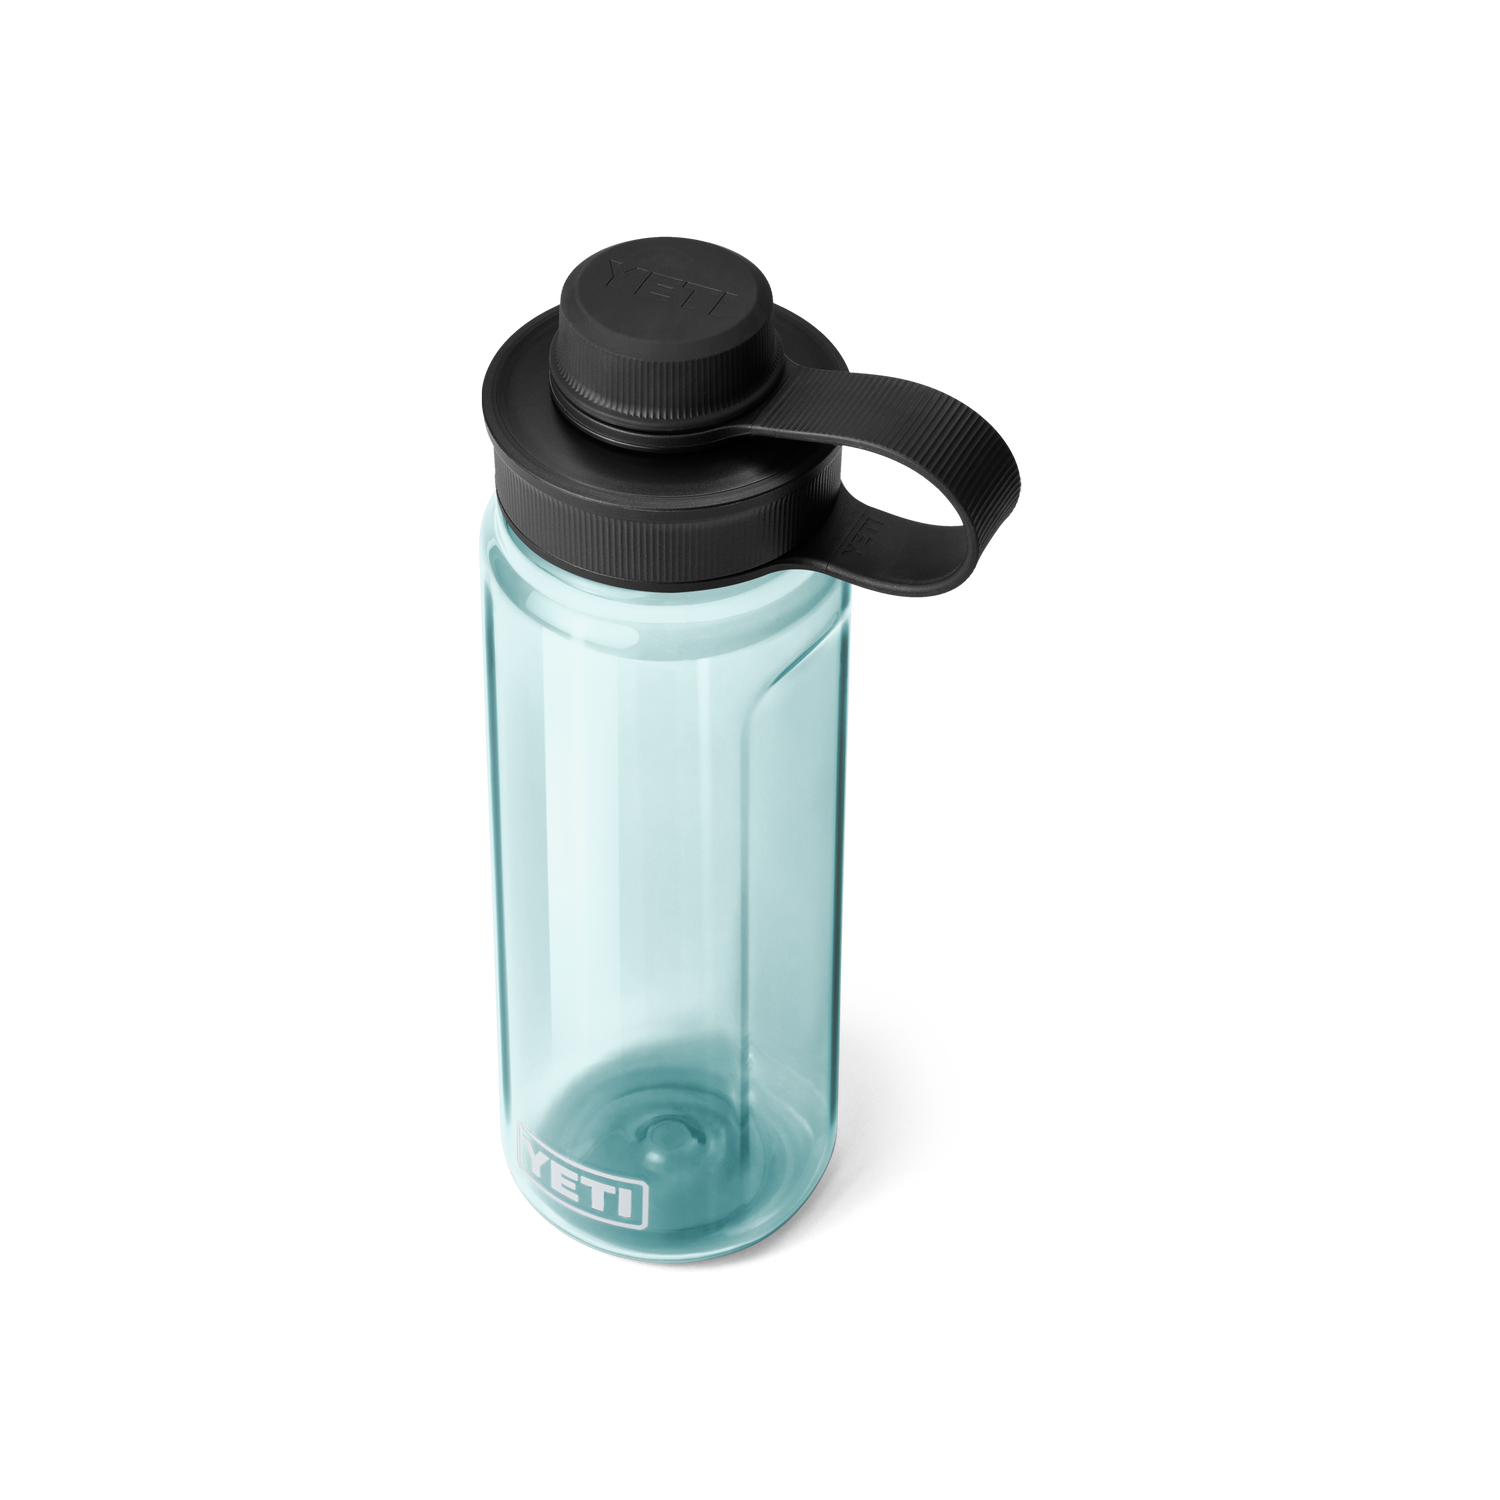 site_studio_Drinkware_Yonder_Tether_Accs_750mL_Seafoam_3qtr_Closed_0842_Primary_B_2400x2400.png